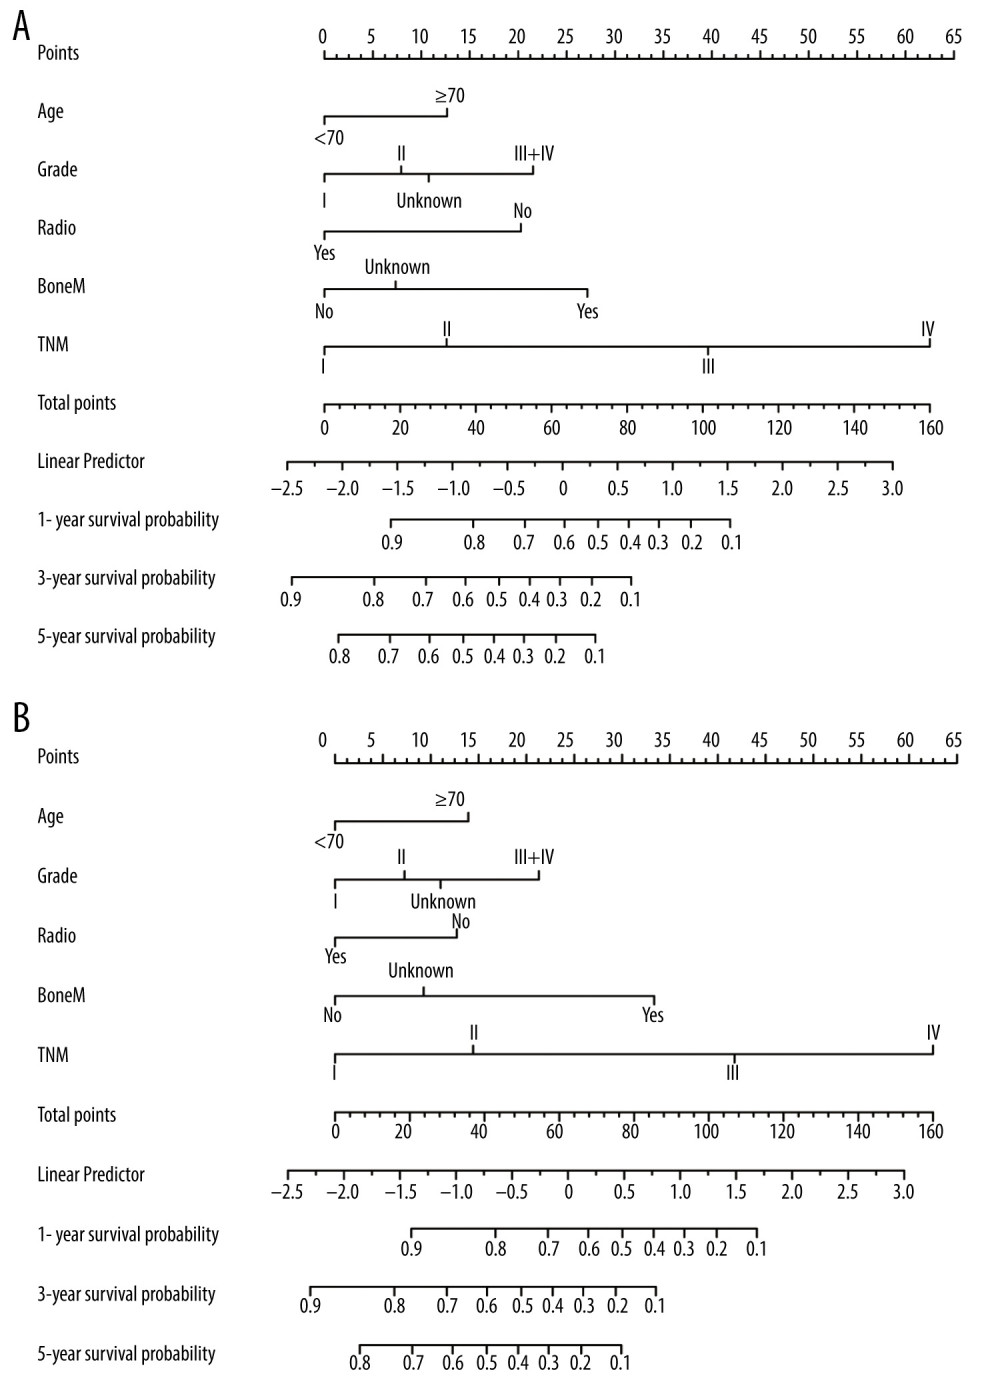 Prognostic nomograms constructed for resected GBAC. (A) Formulated nomogram for OS of resected GBAC and (B) formulated nomogram for CSS of resected GBAC.